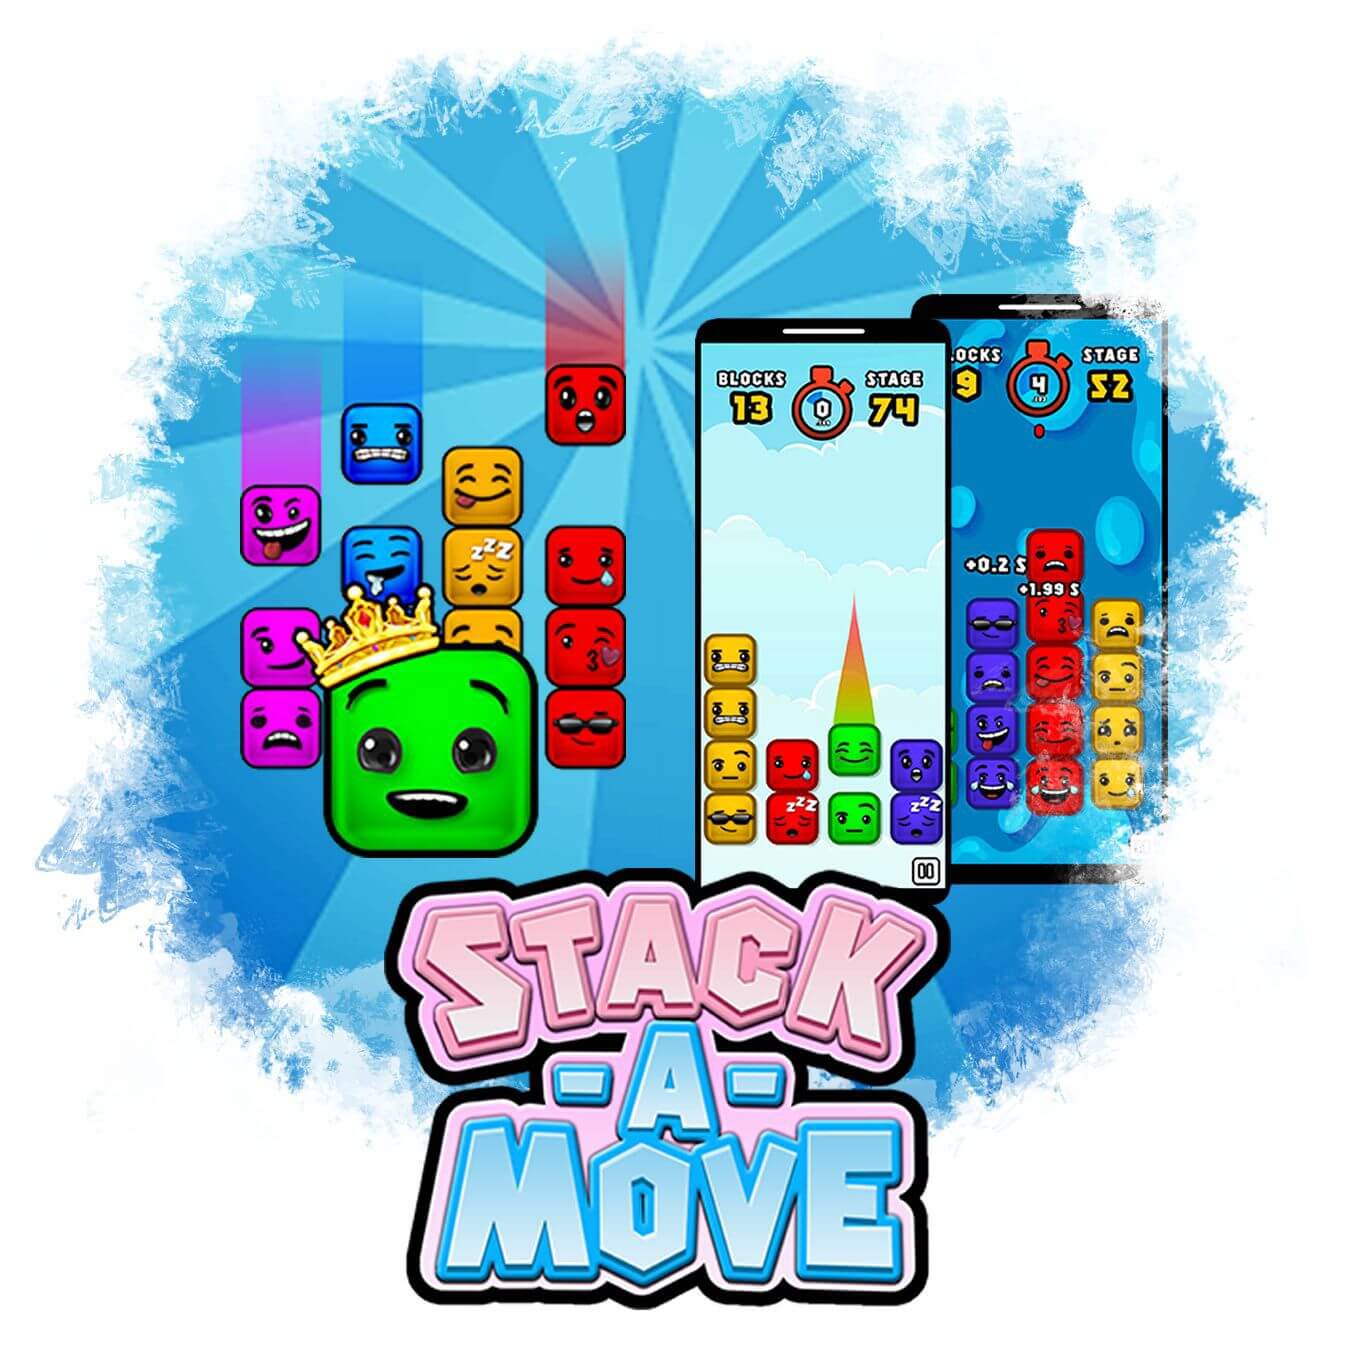 Profiting Mobile Game Development Studio Seeking Investment For Growth 5X ROI